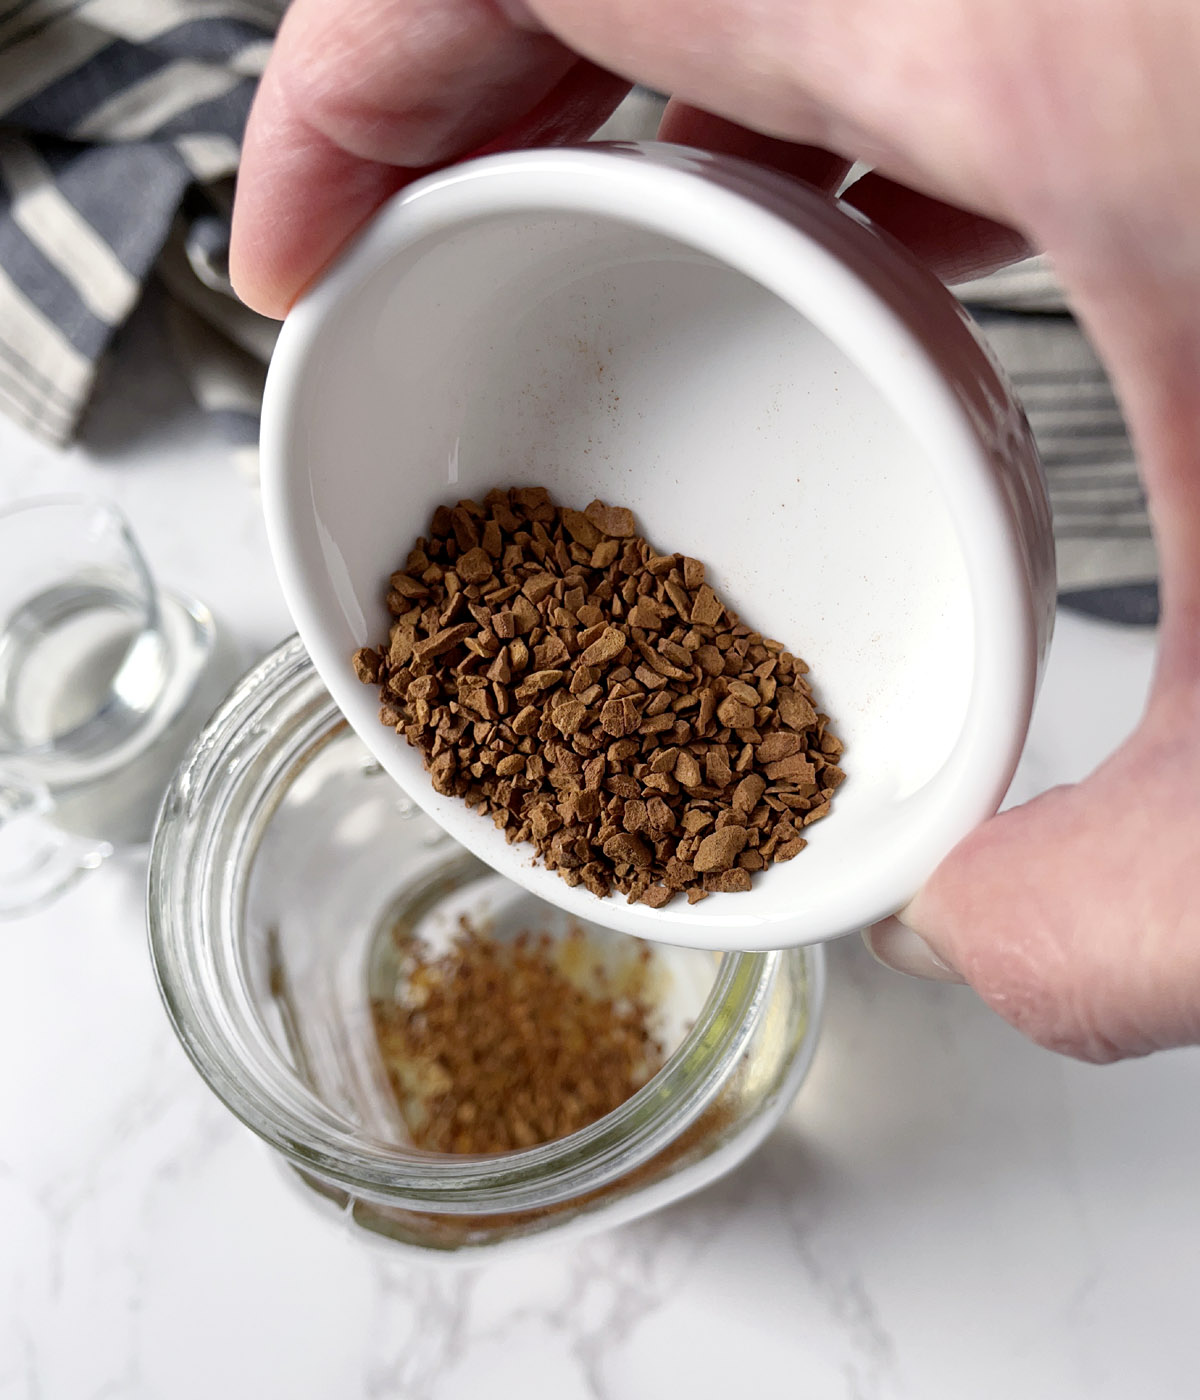 Close-up of a hand holding a white dish pouring brown coffee granules into a glass bottle.
